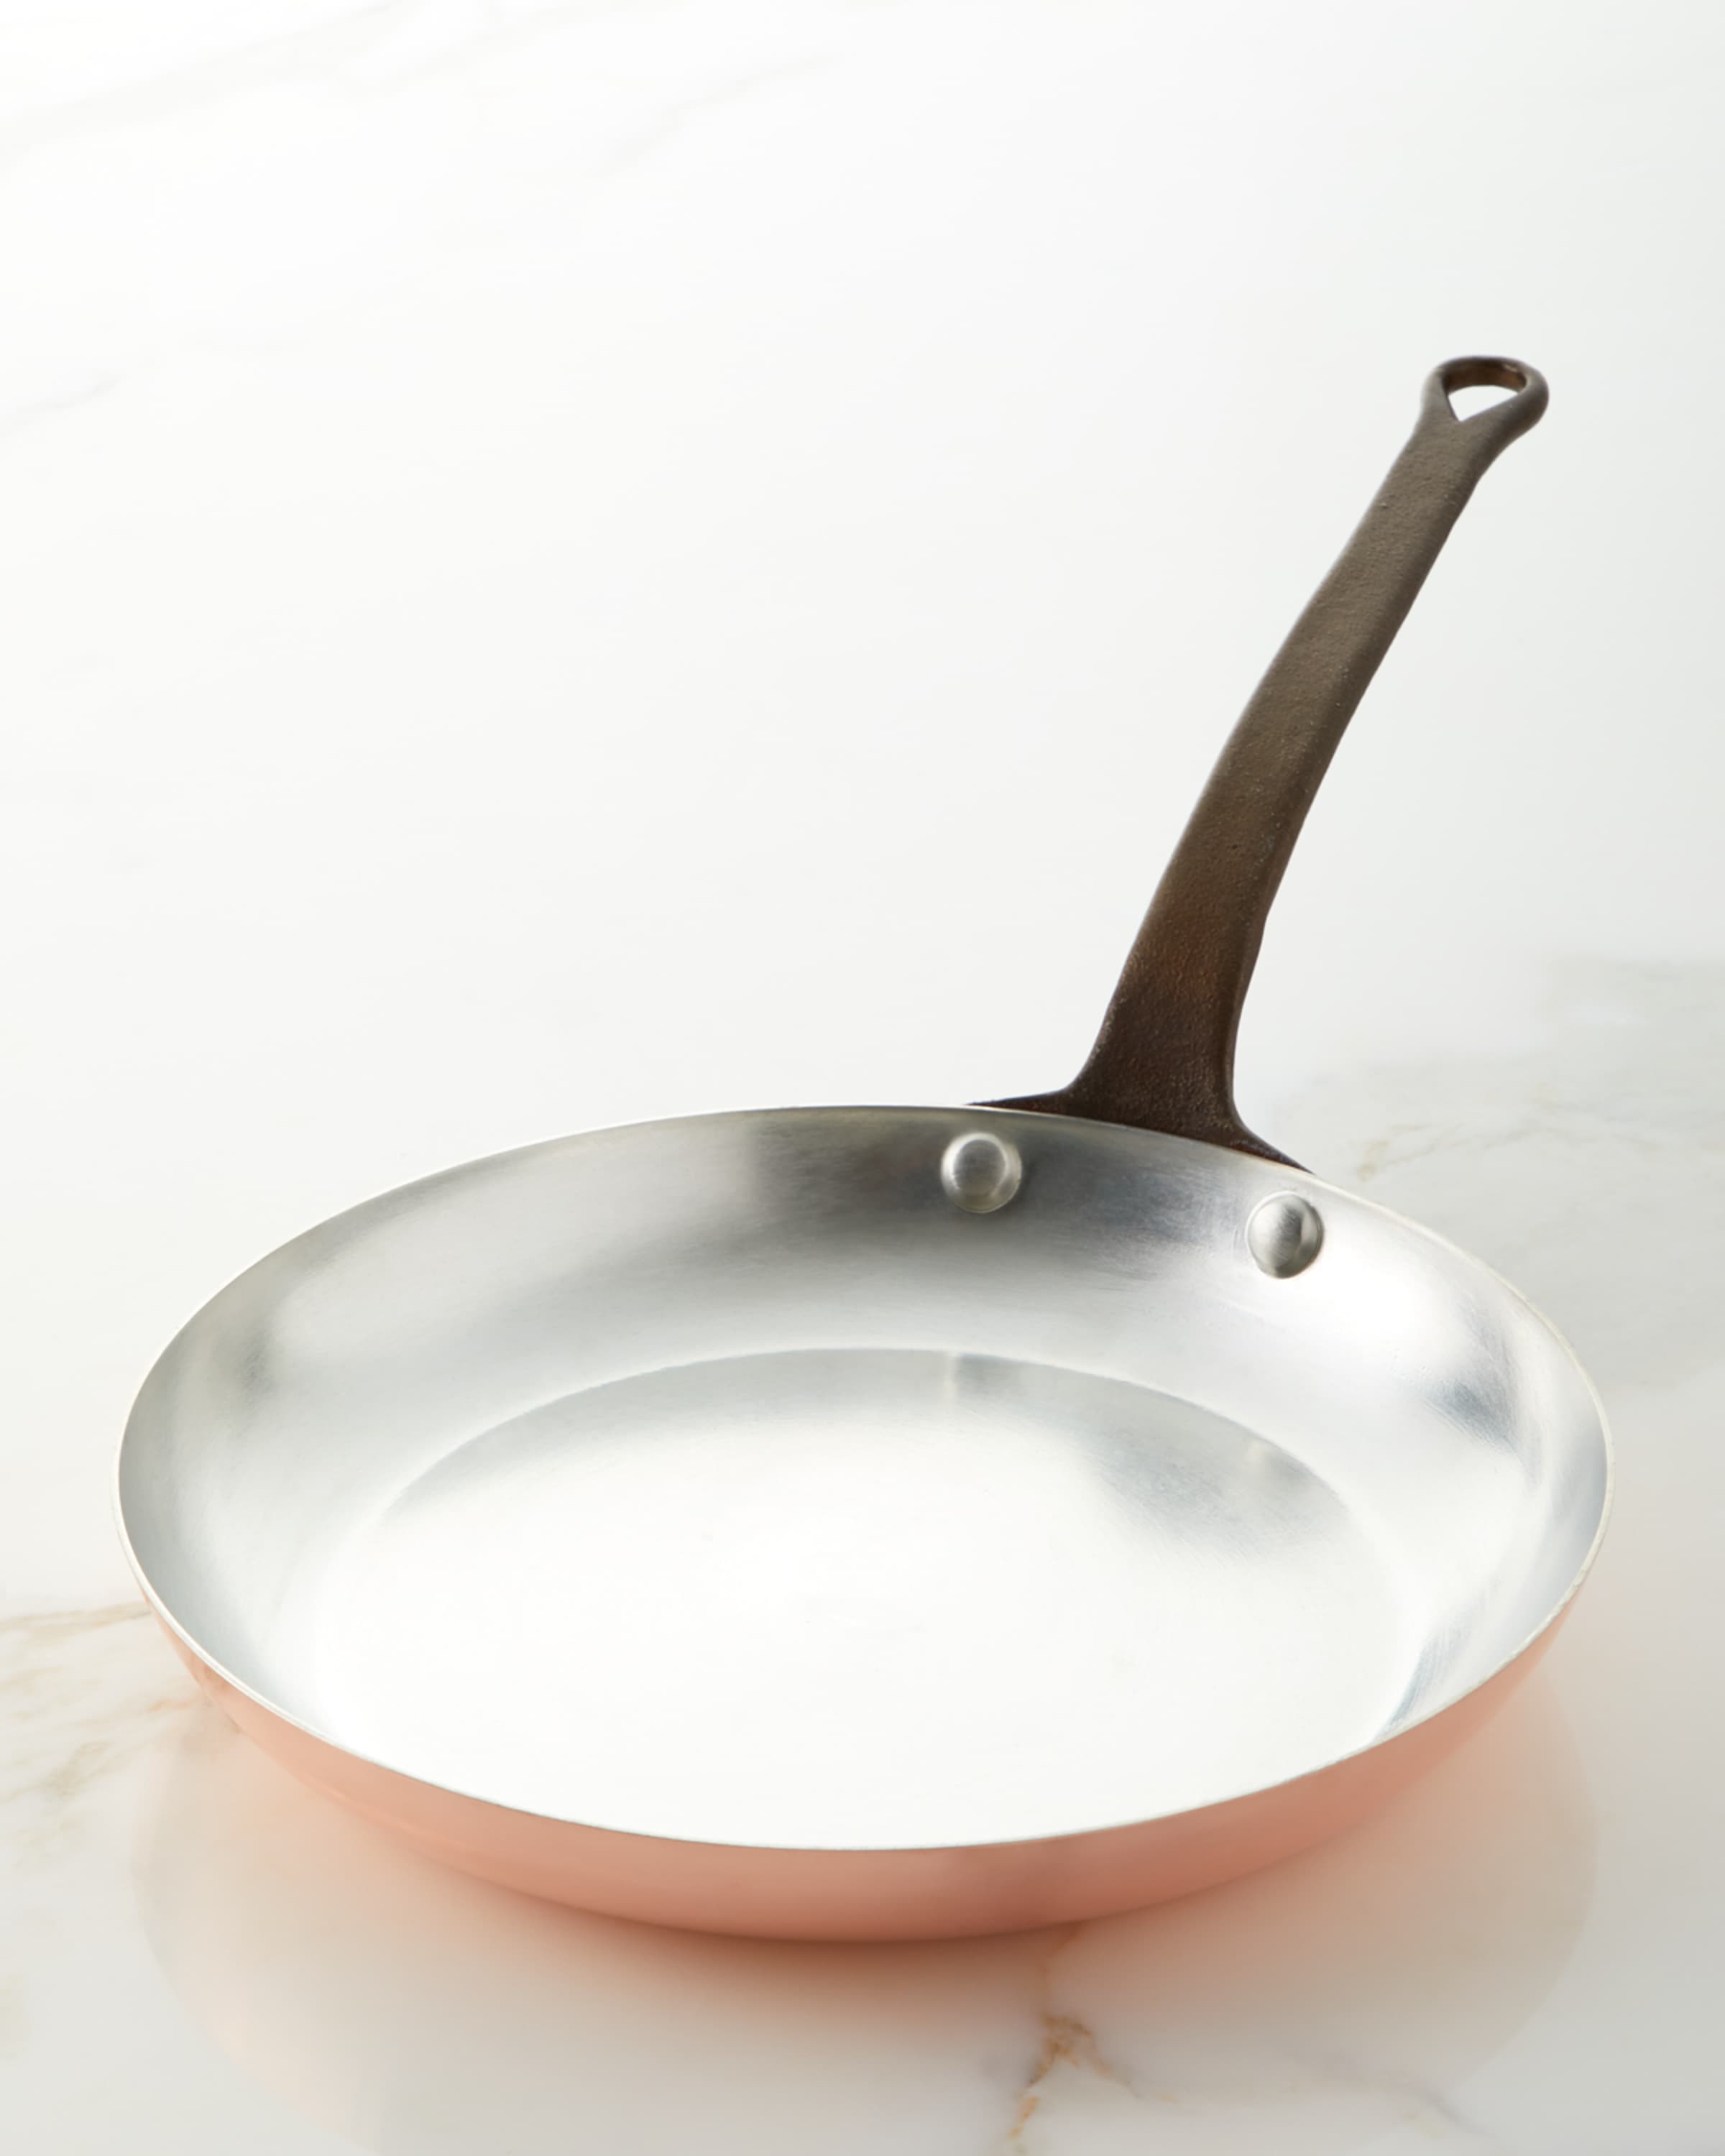 Duparquet Copper Cookware Solid Copper Silver-Lined Fry Pan